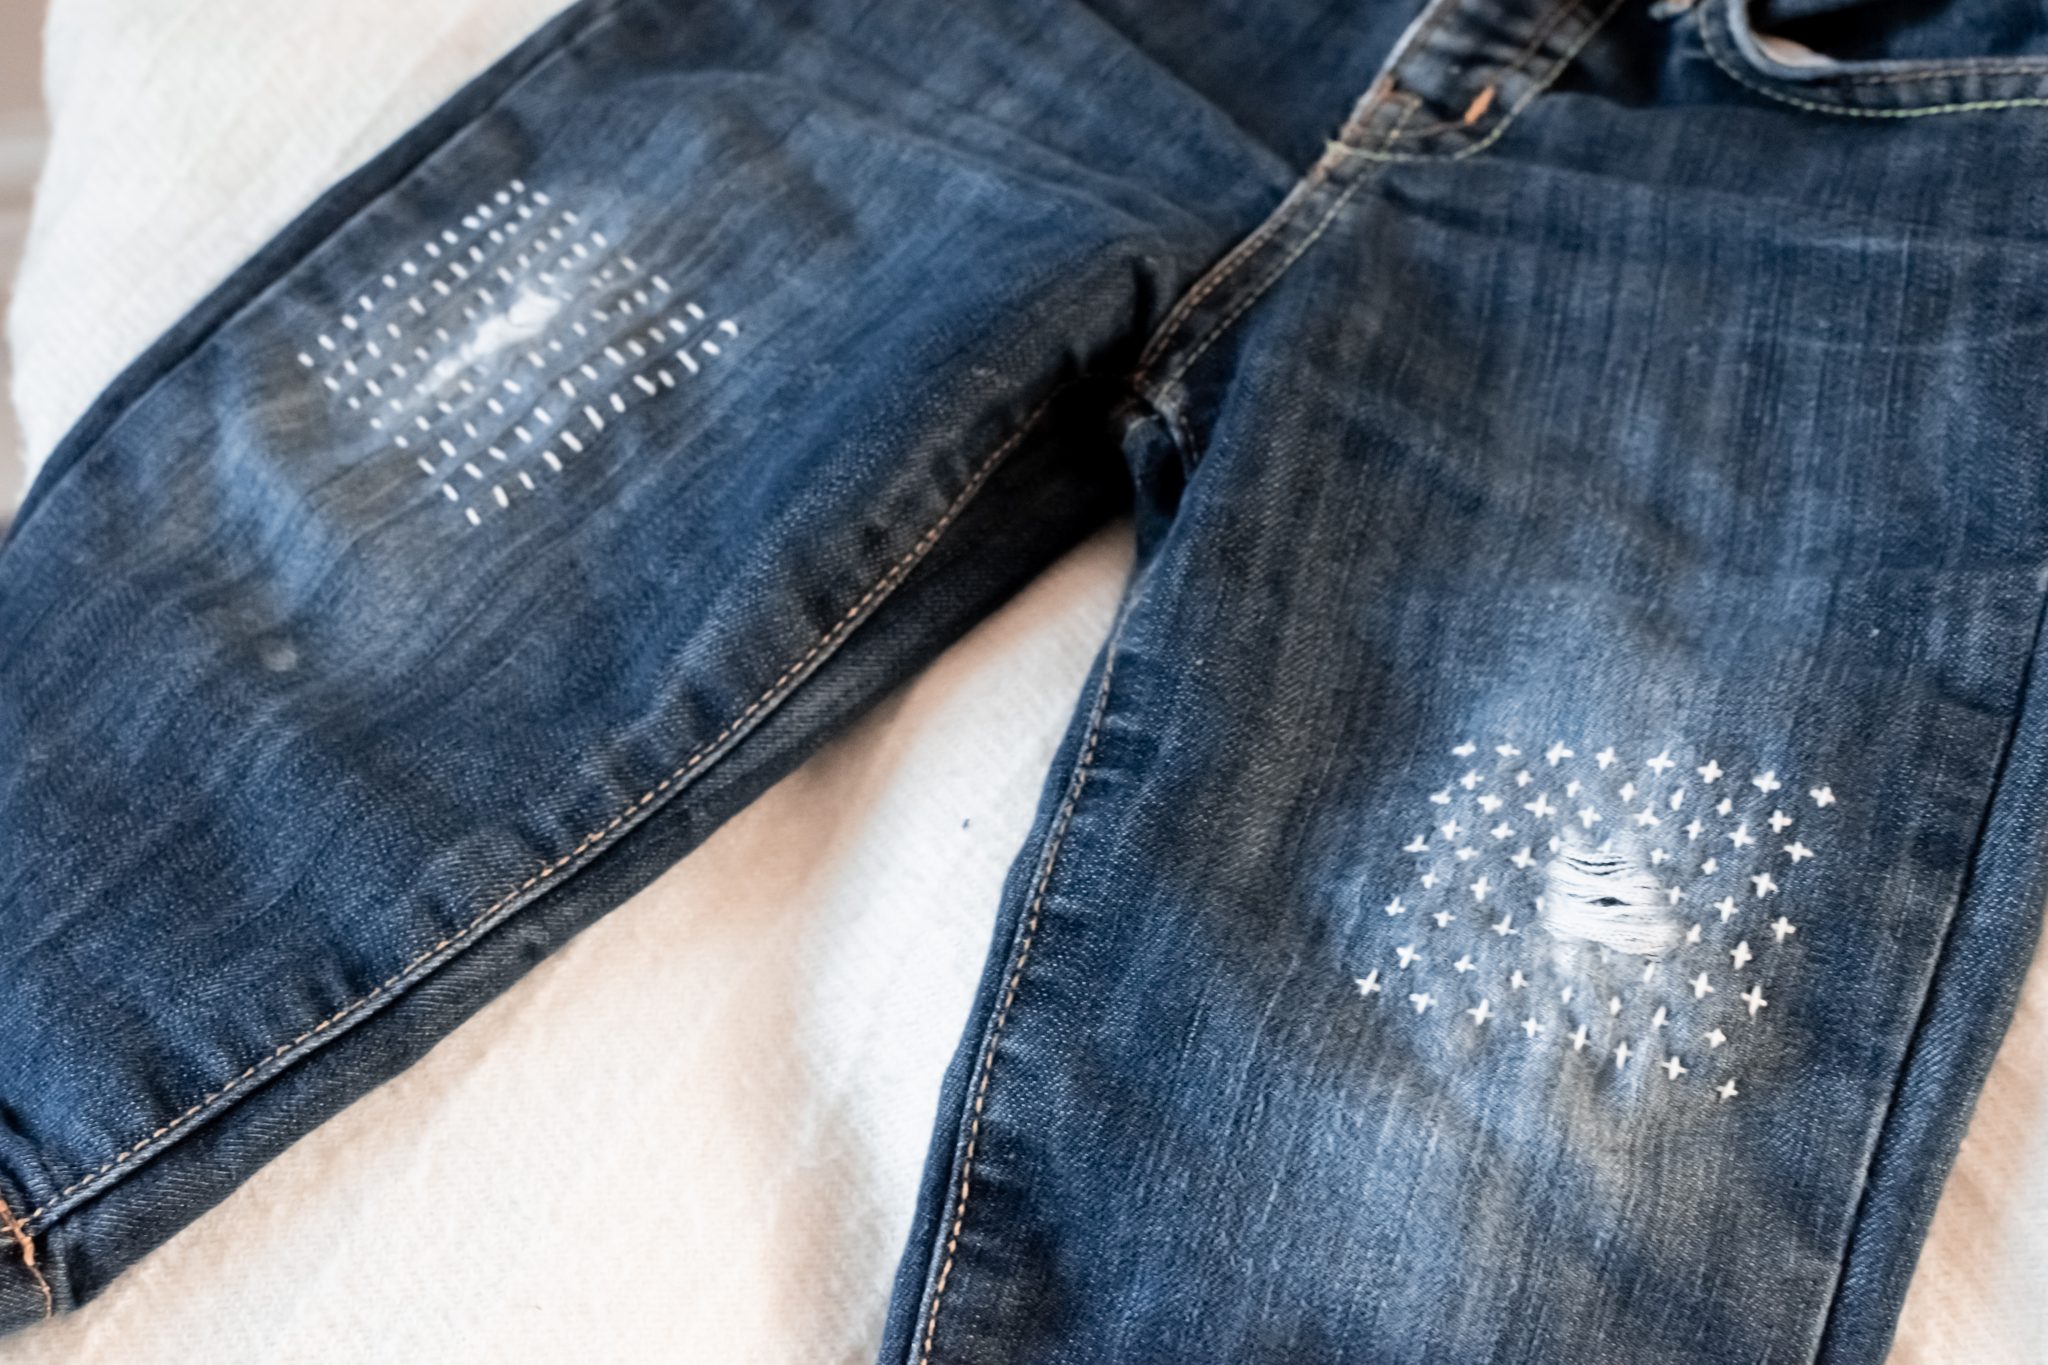 How to: Repair a Hole in JEANS, Sashiko Hand Sewing